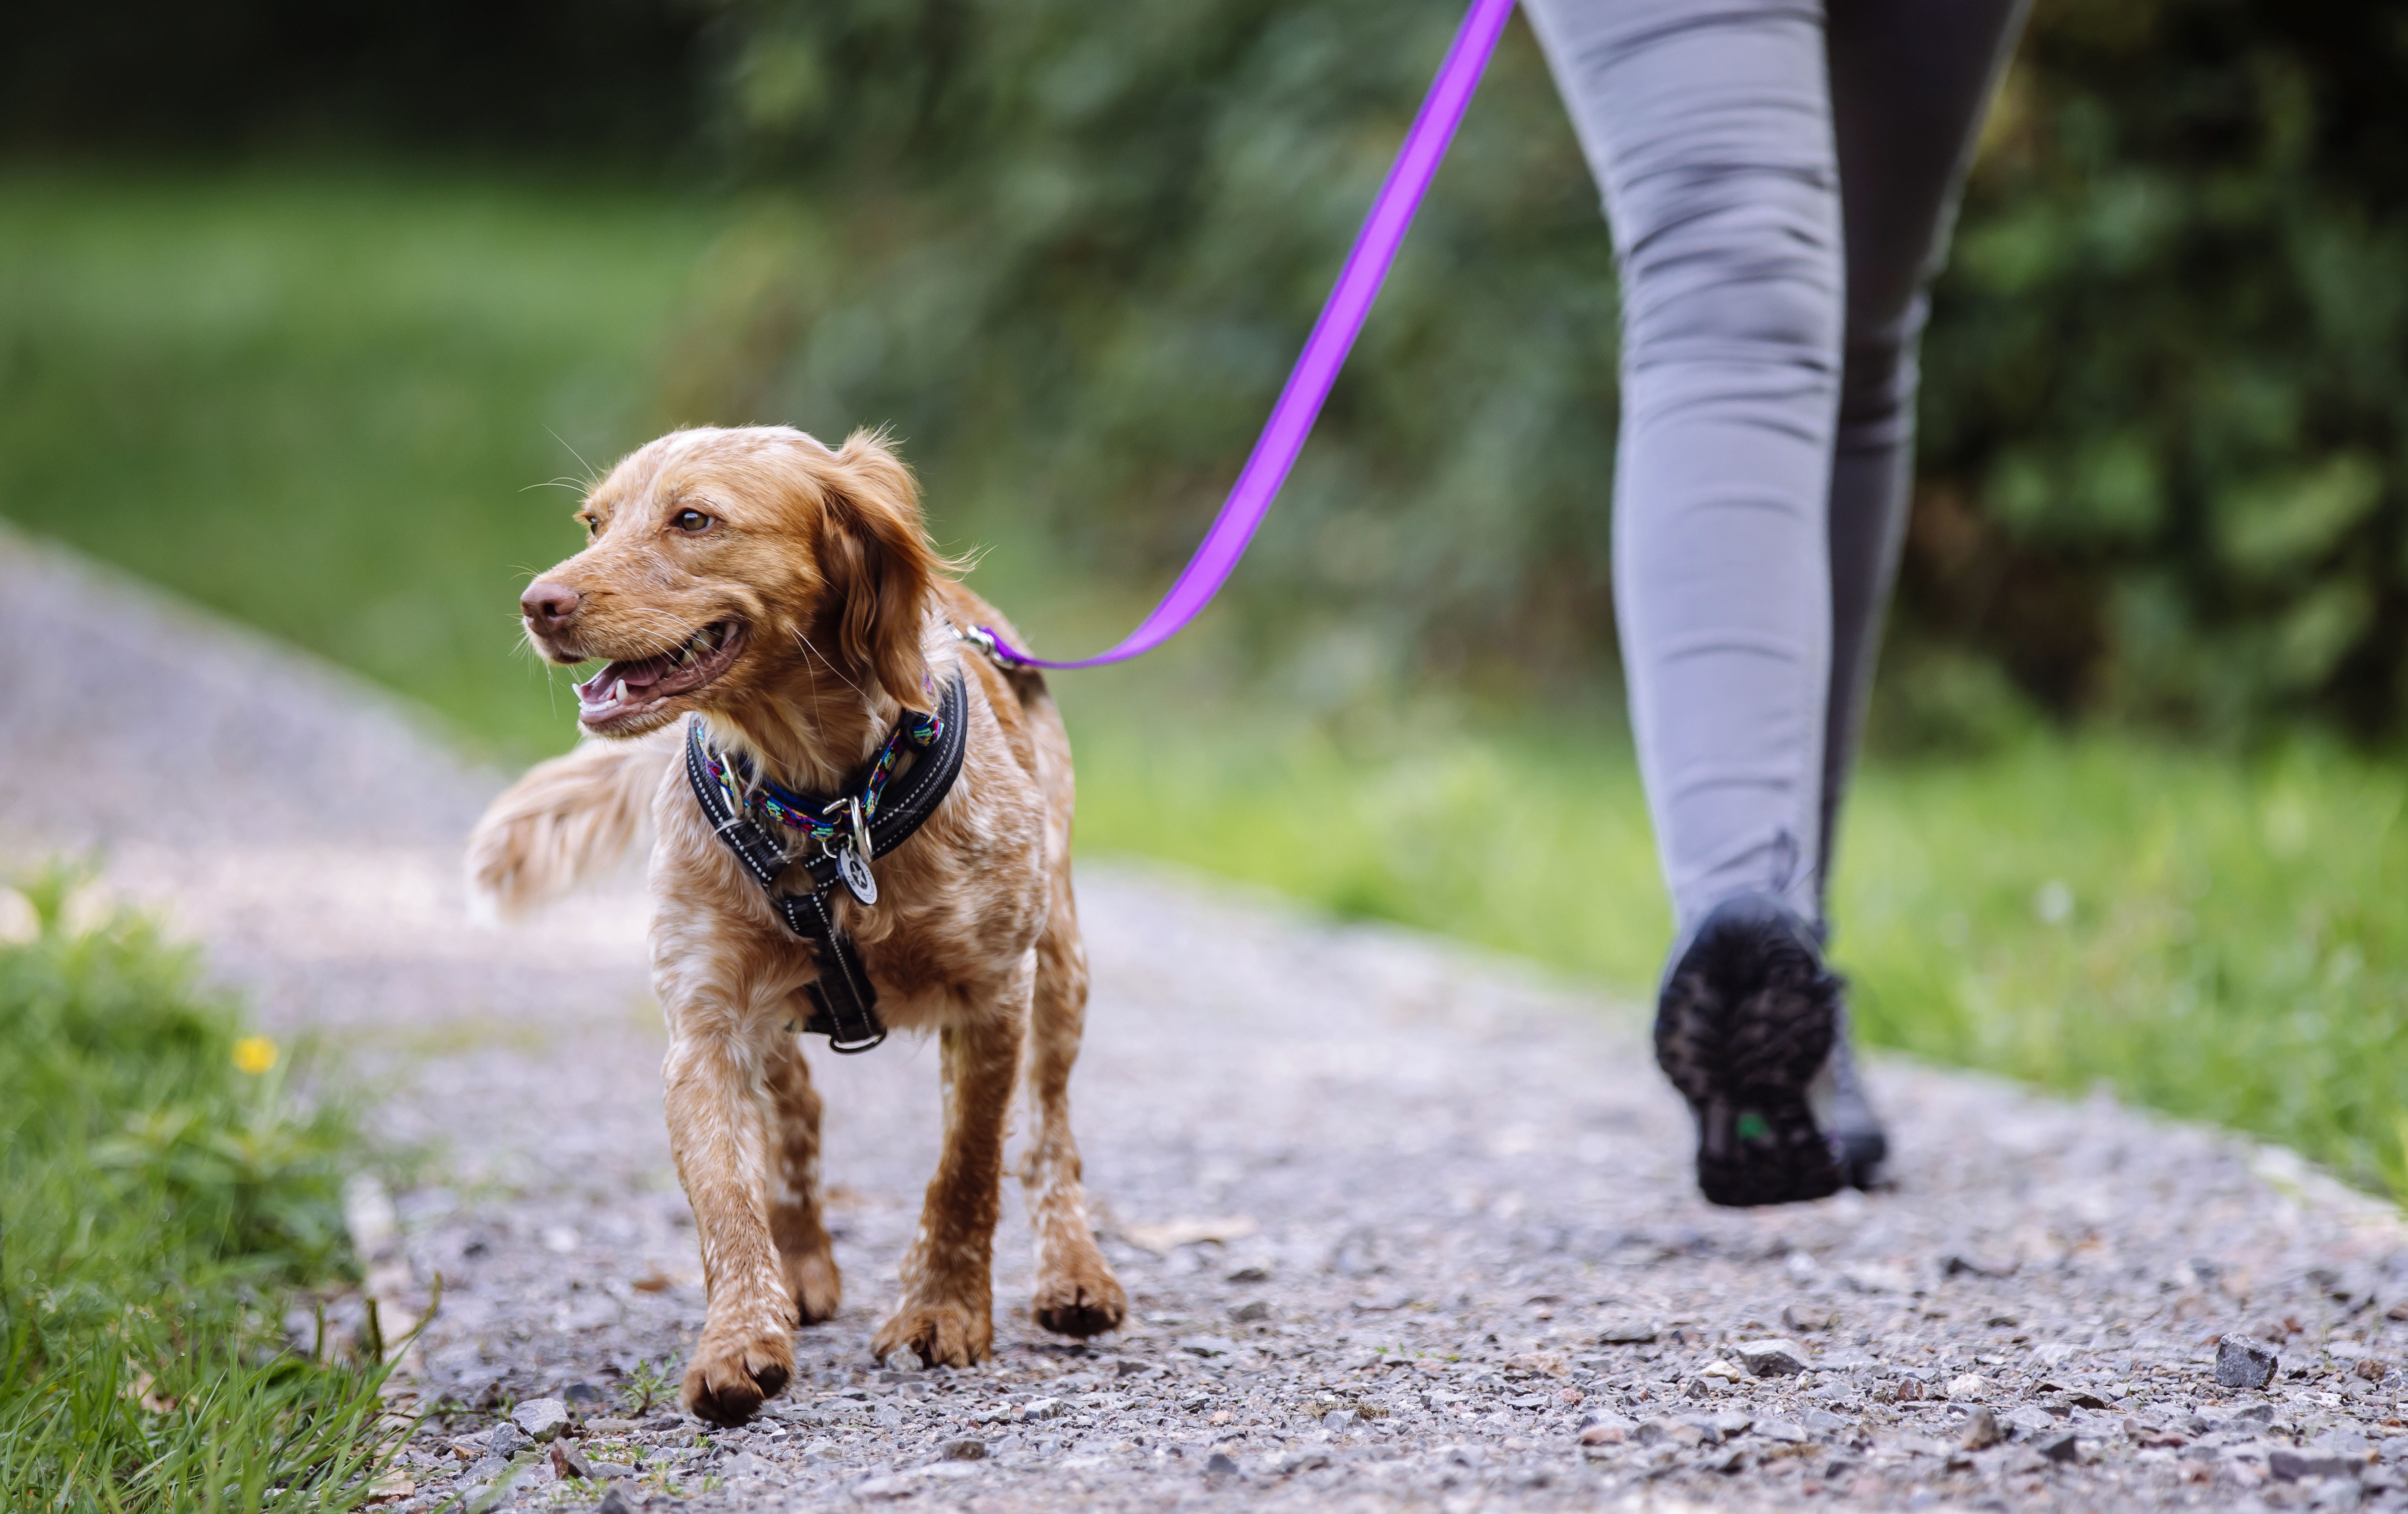 A red cocker spaniel cross walks along a path on a purple lead, her tail wagging